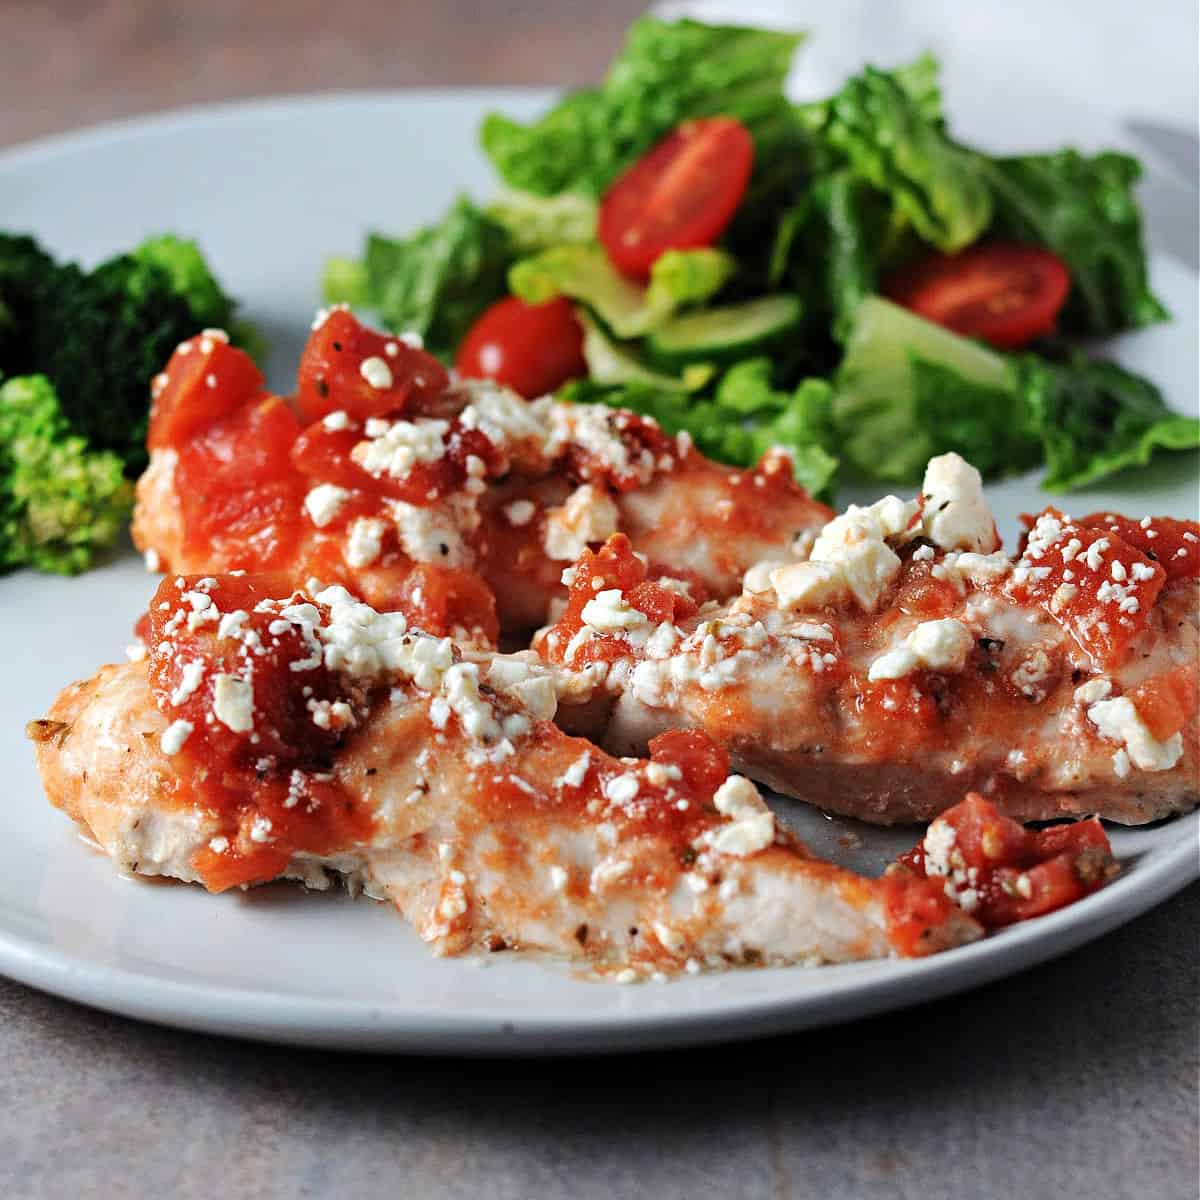 healthy baked feta chicken tenderloins on a plate with salad.